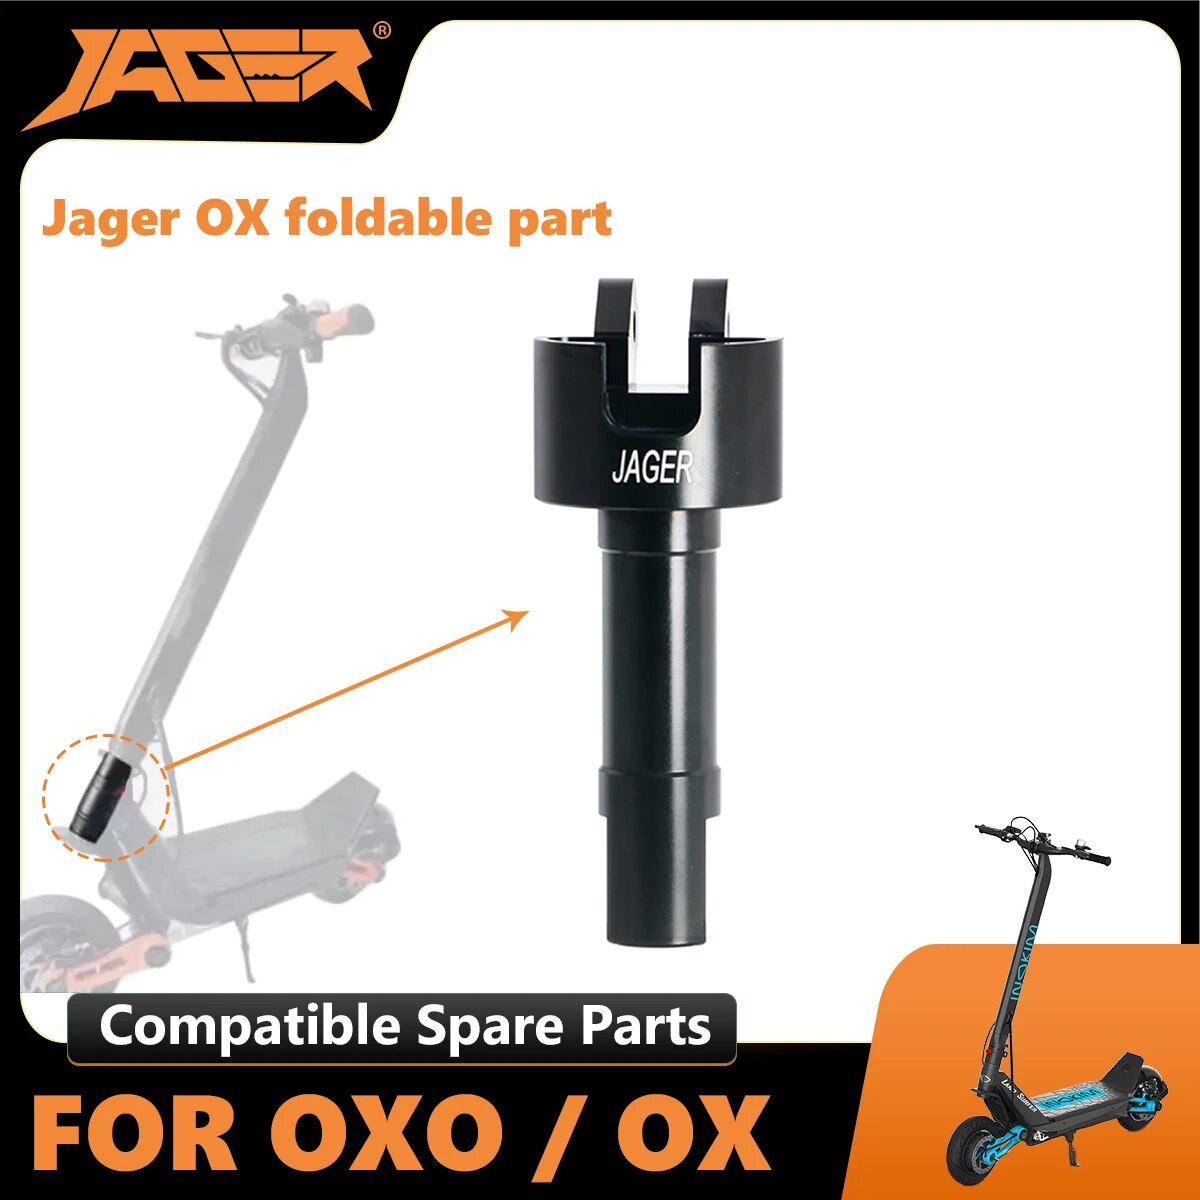 Jager foldable part for steam compatible with Inokim steam inokim parts accessories